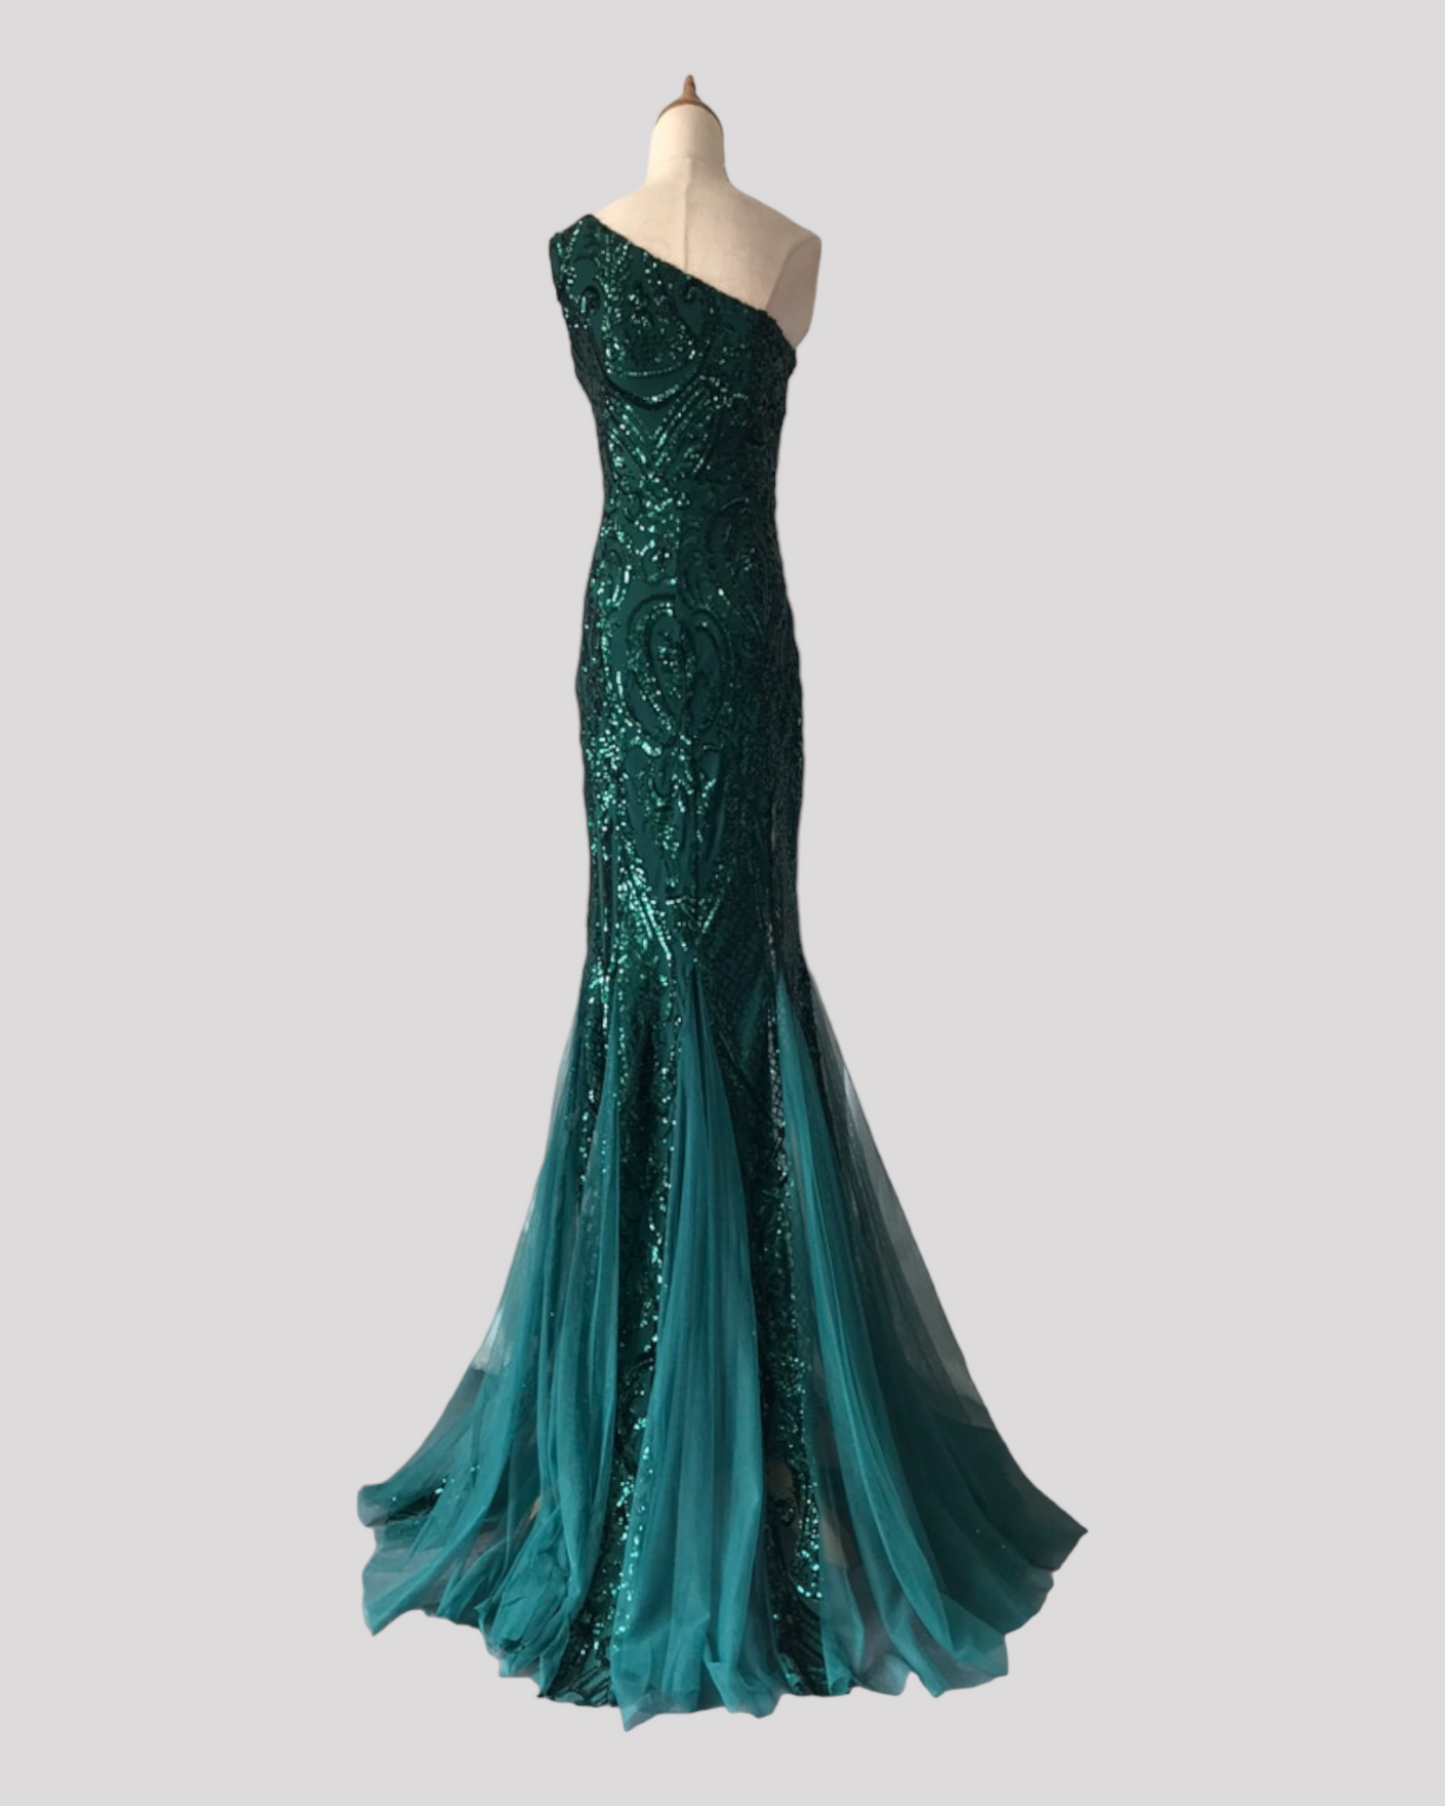 One Shoulder Sequin Mermaid Evening Dress with soft Chiffon Skirt Insert available in 5 Colours